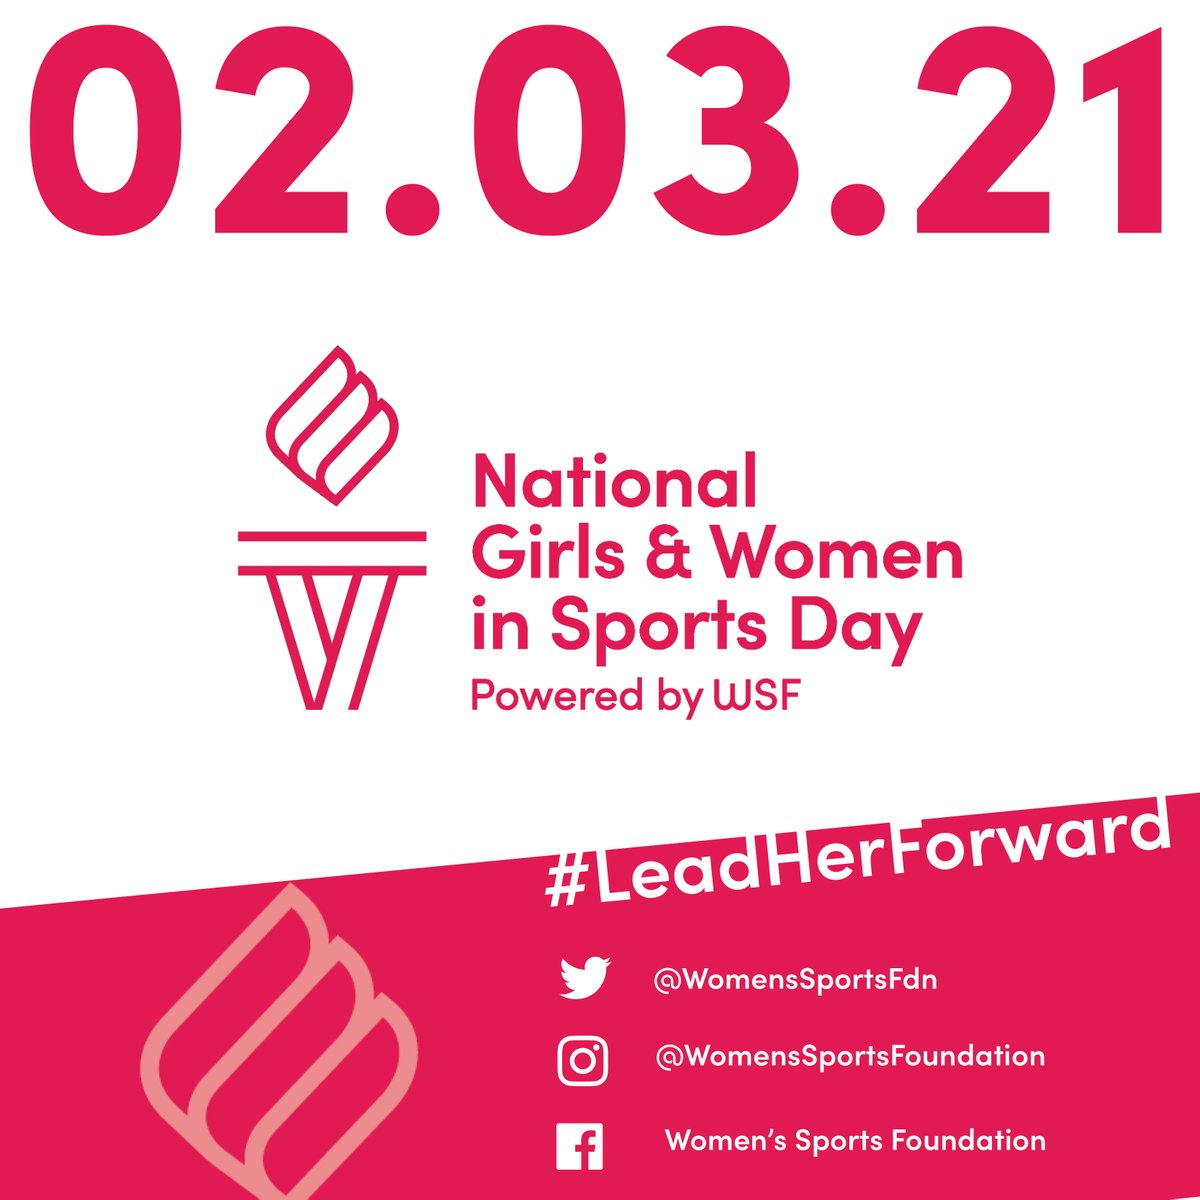 Calling all girls! Join the @WomensSportsFdn for the 2021 Girls Fest on #NGWSD!  
 
Hosted by @LaChinaRobinson, @phaidraknight and @teampersley, the celebration will take place Feb. 3 at 4 pm ET on WSF's YouTube channel! #LeadHerForward @stkateswildcats 

youtube.com/results?search…